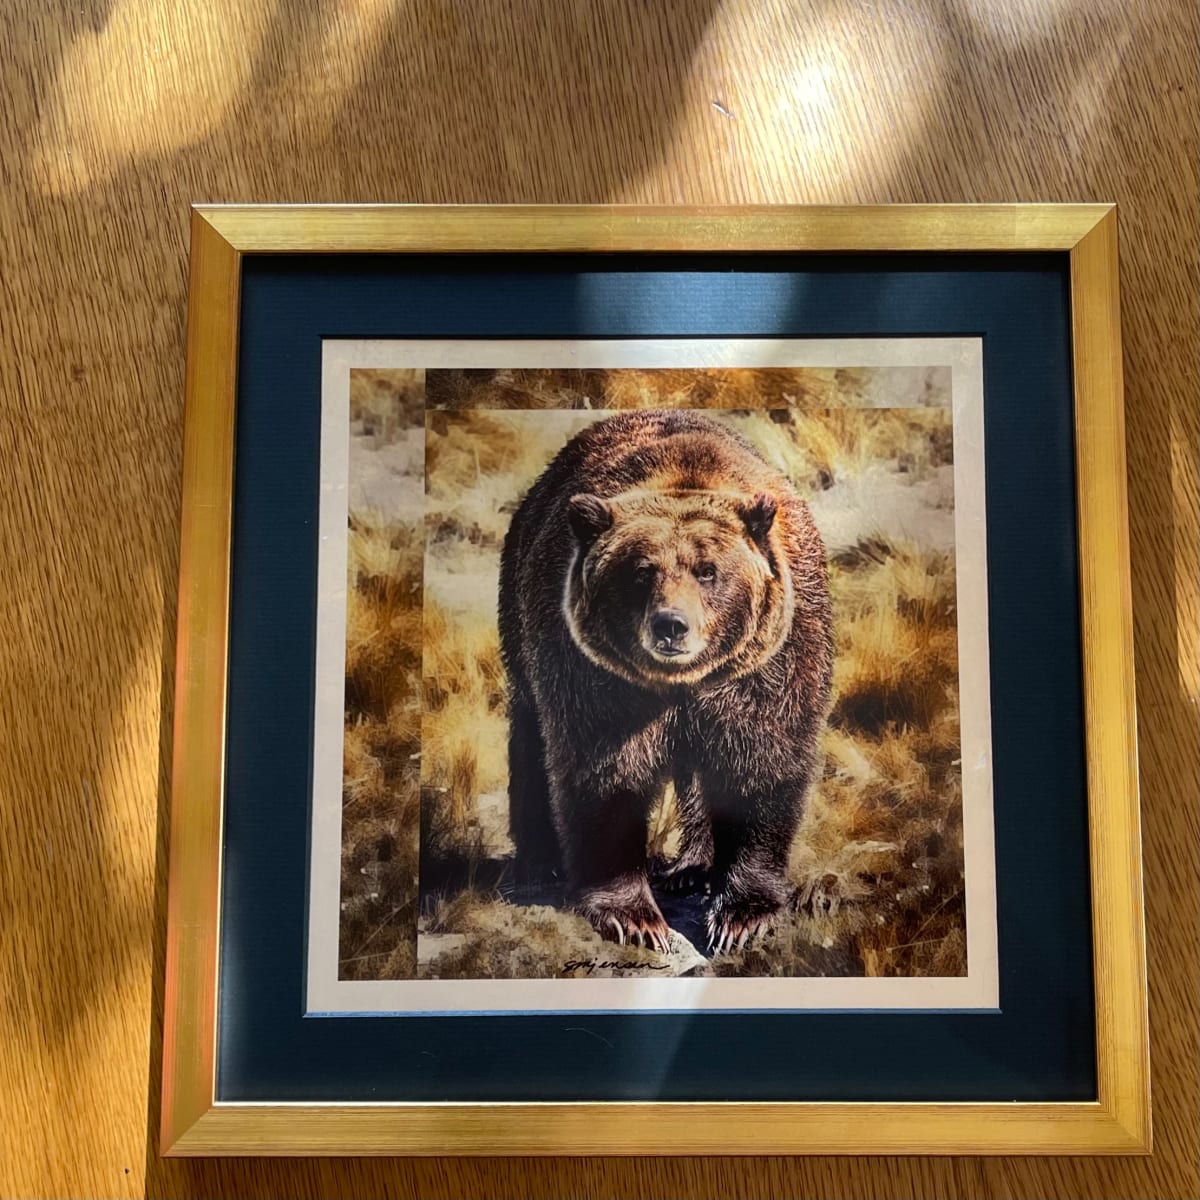 Solid Gold Grizzly of Denali 10.5 x 10.5  Image: Solid Gold Grizzly of Denali 10.5 x 10.5 